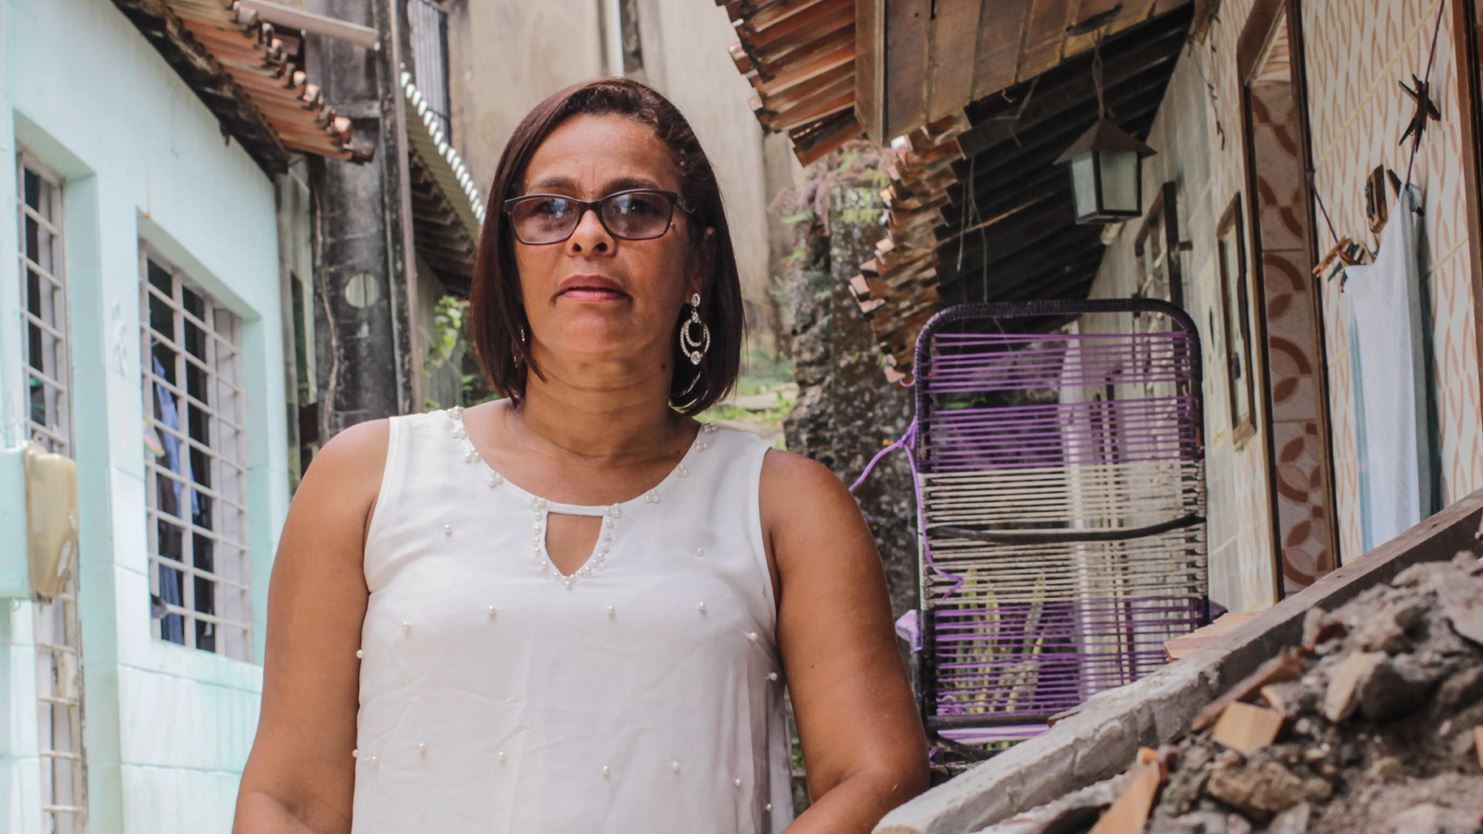 Sandra, an activist in Brazil who speaks out about the issue of plastic polution